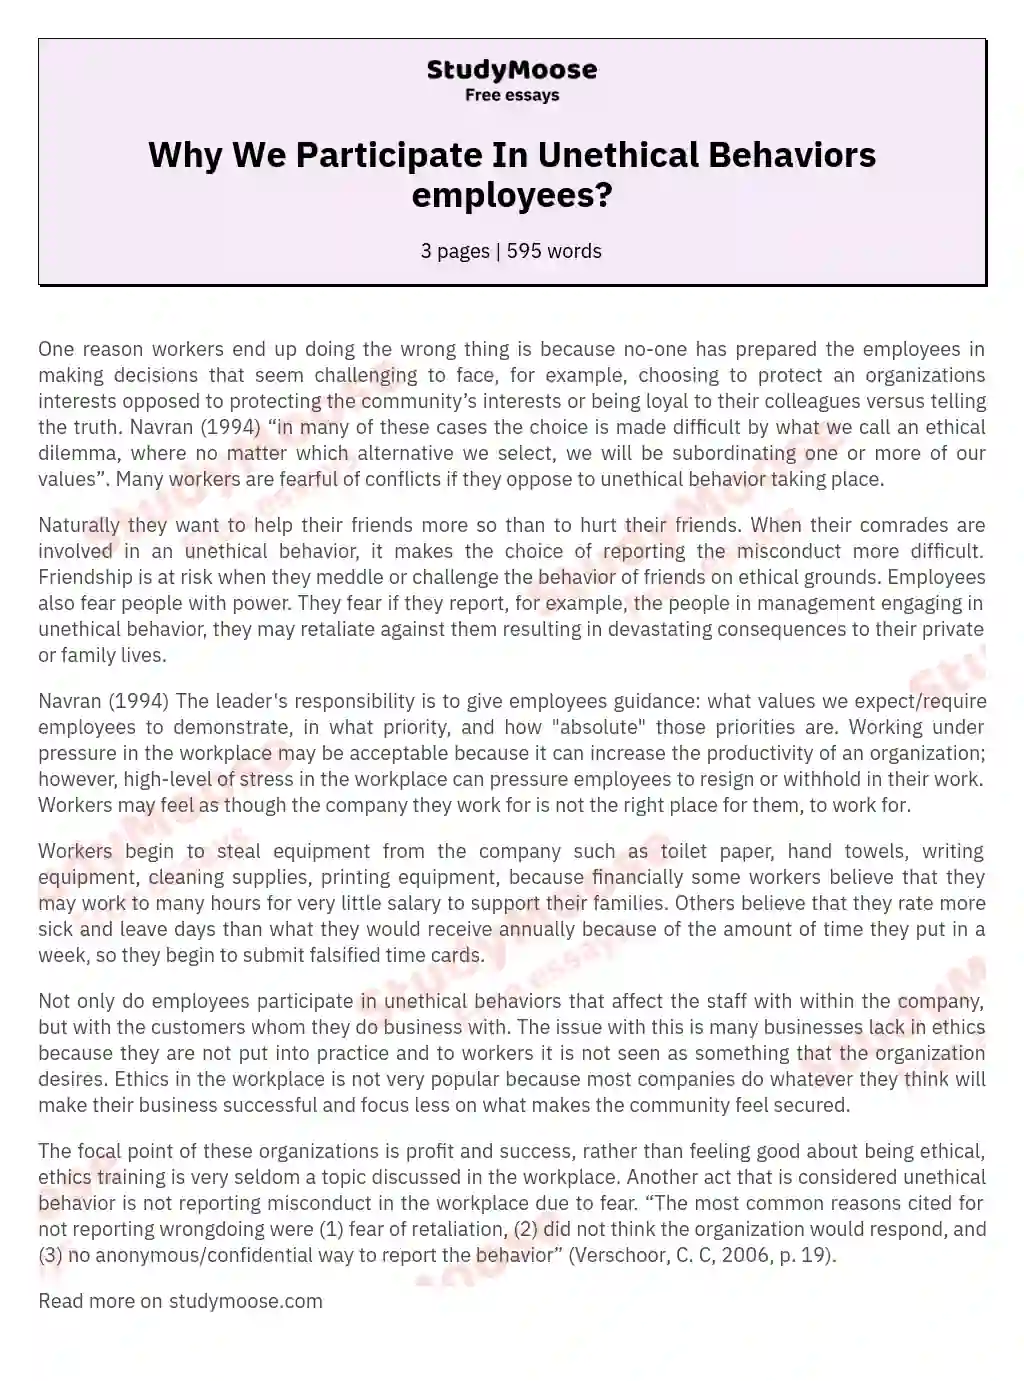 Why We Participate In Unethical Behaviors employees? essay